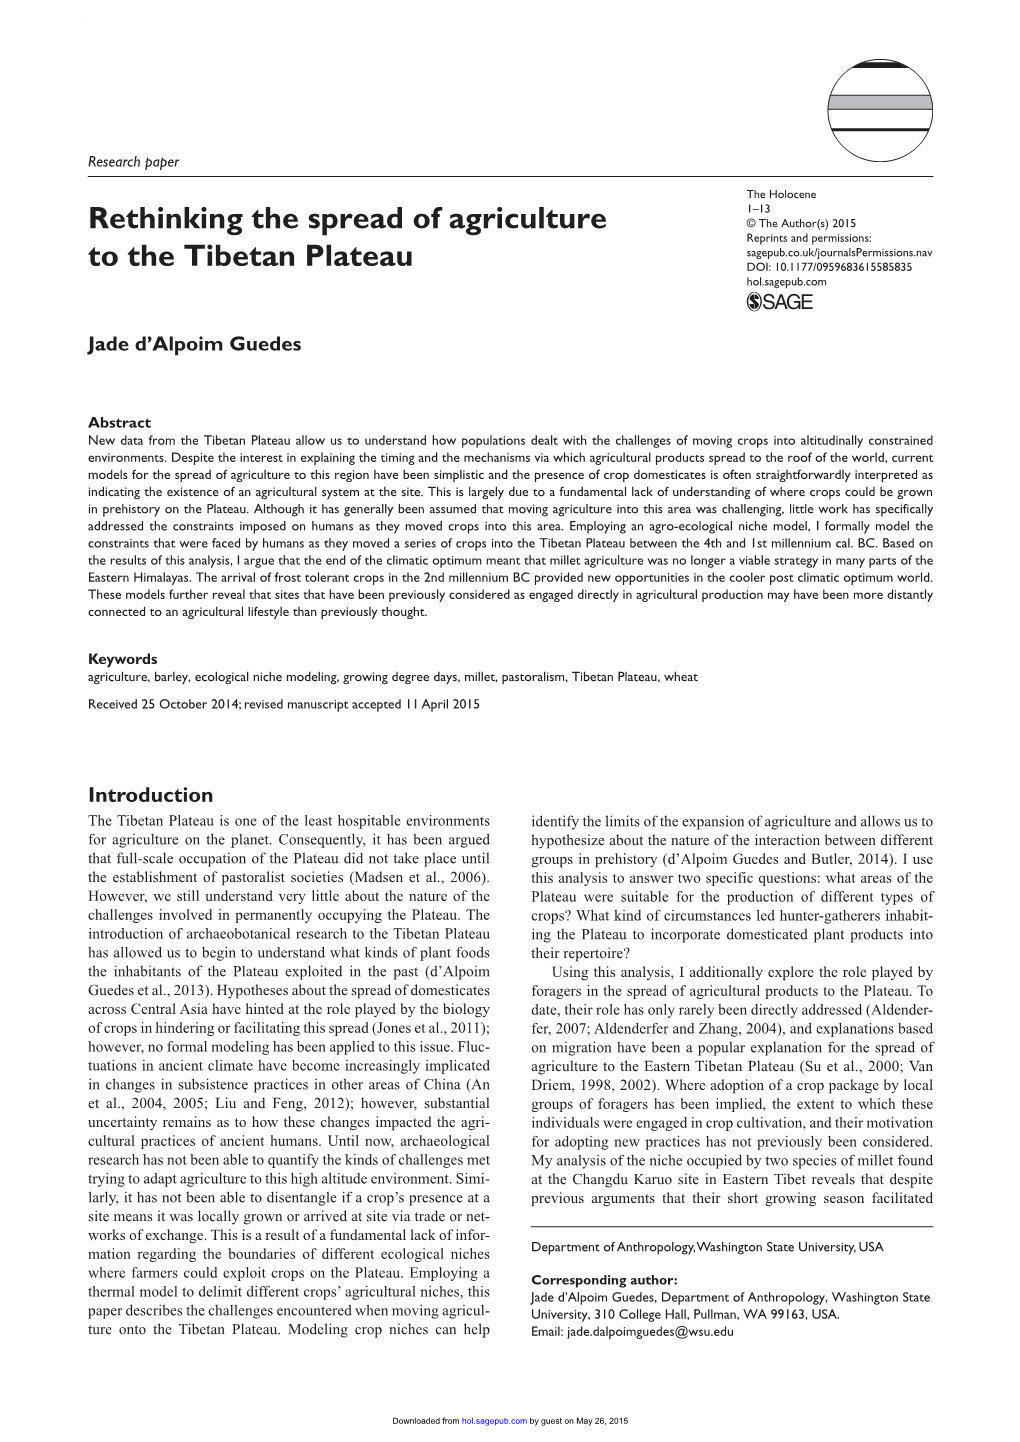 Rethinking the Spread of Agriculture to the Tibetan Plateau